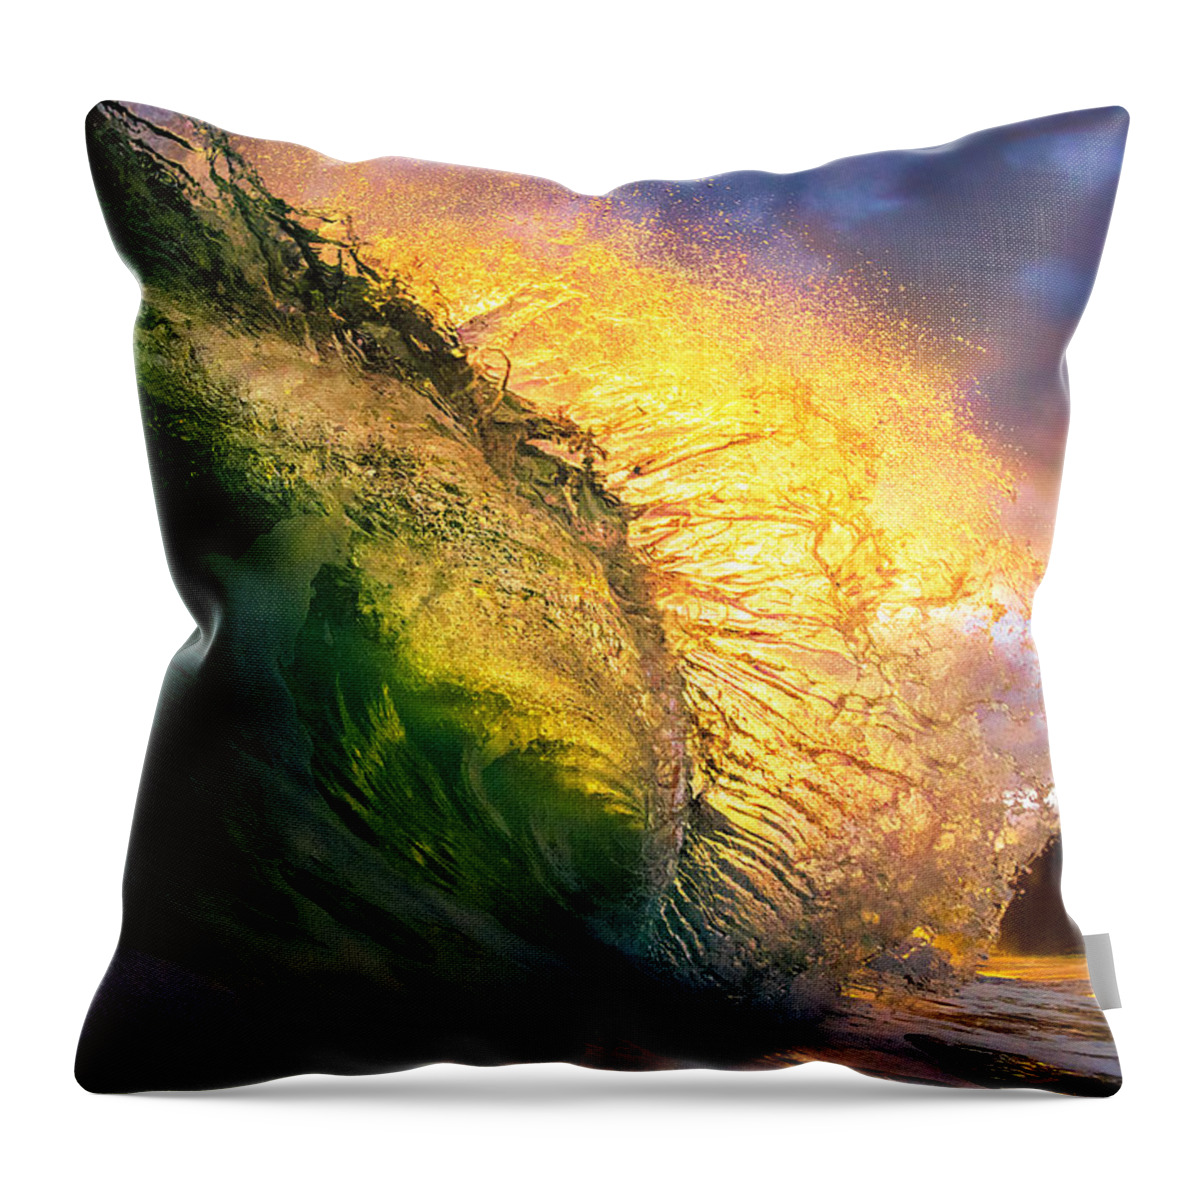  Throw Pillow featuring the photograph Sea Horse by Micah Roemmling